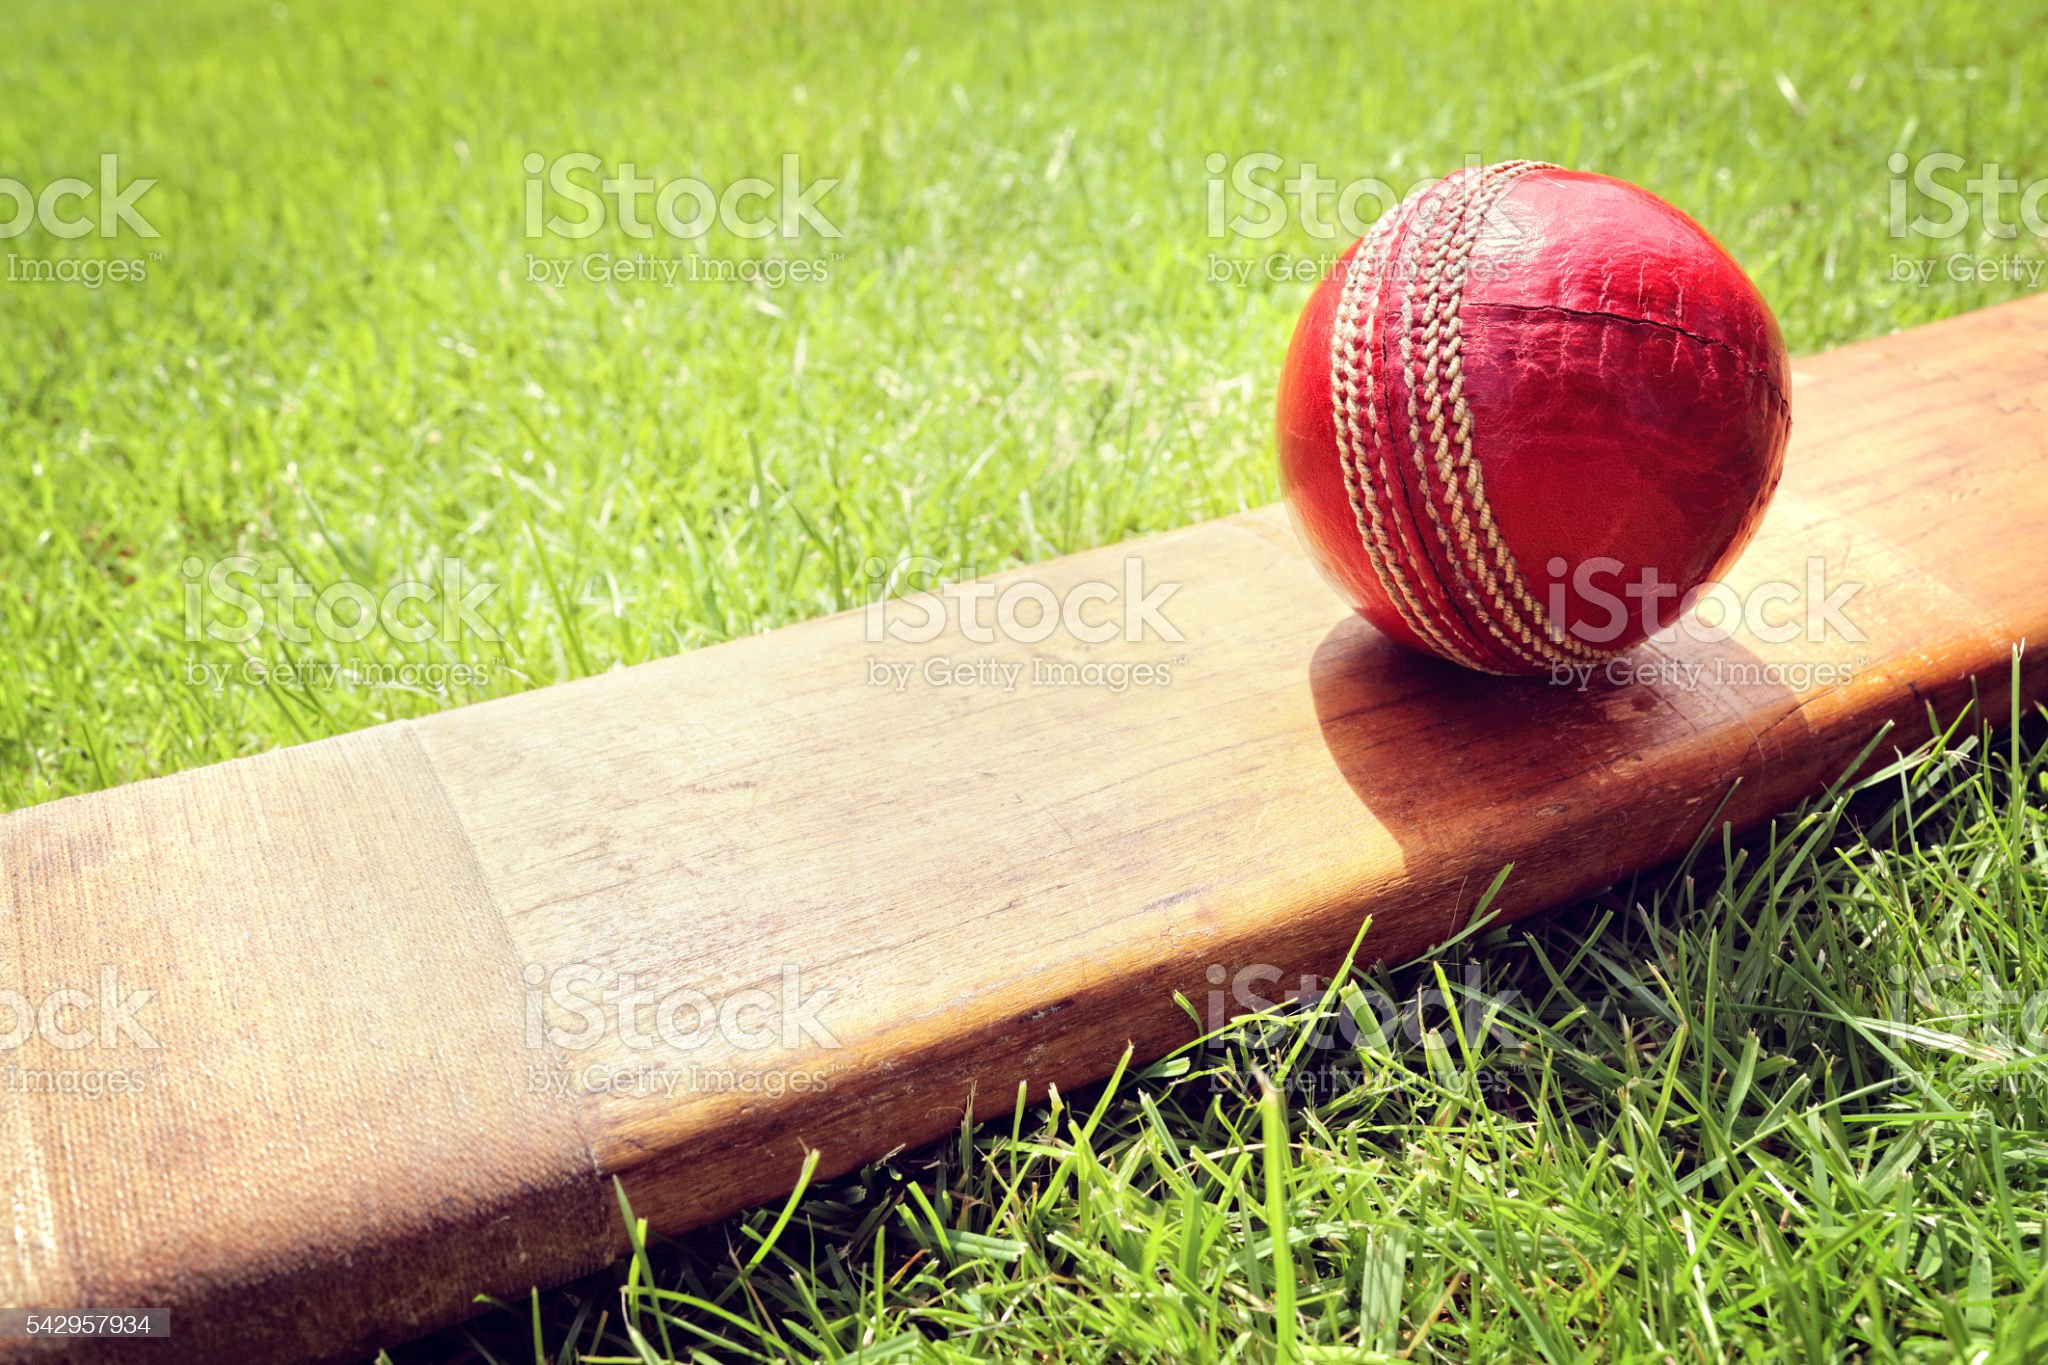 Cricket Bat And Ball Image Now